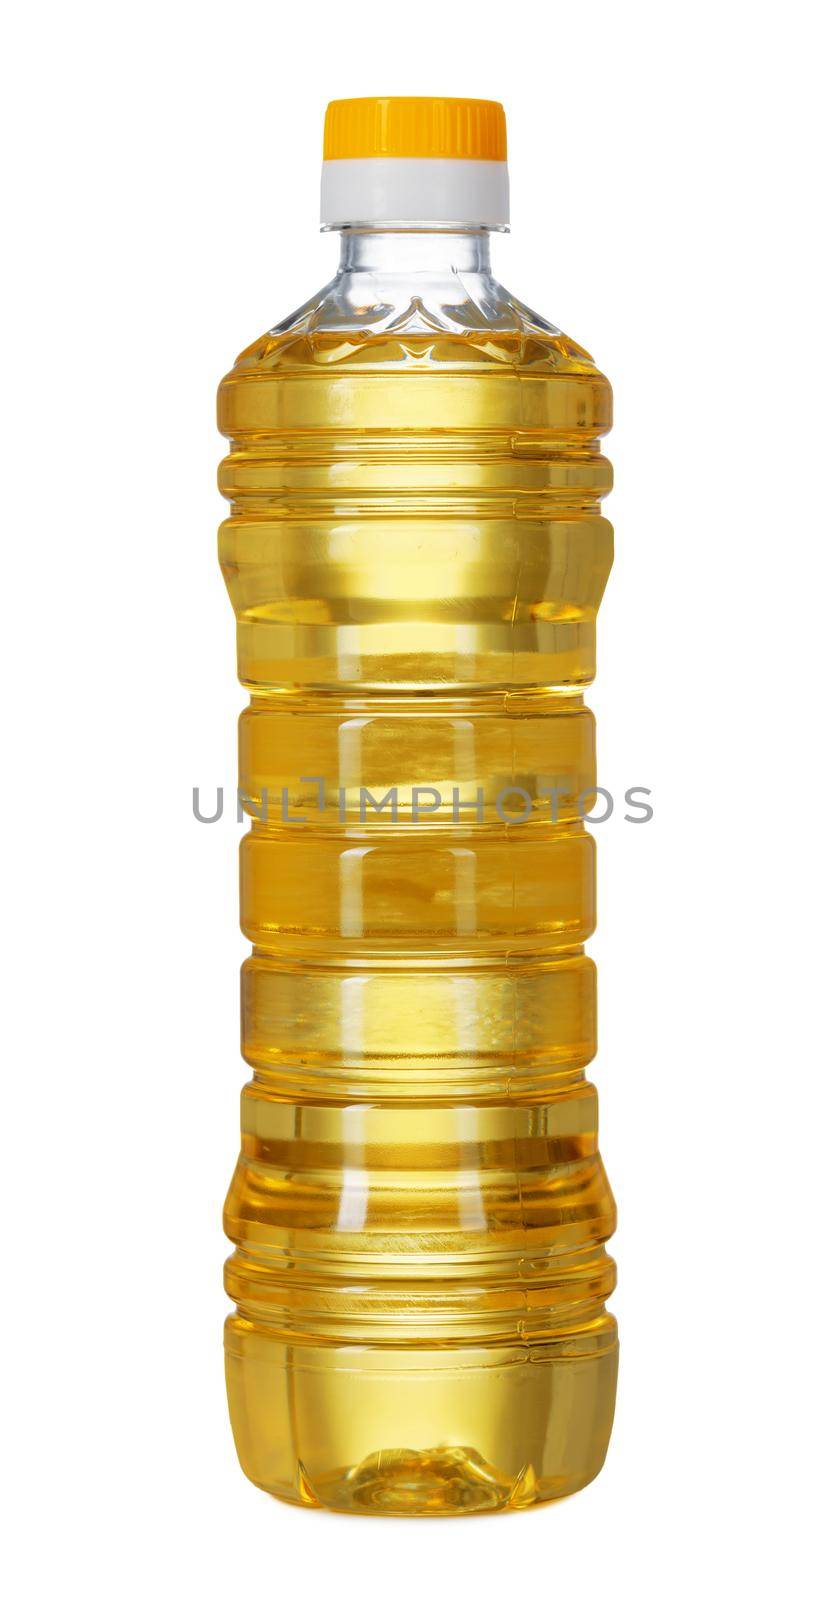 Bottle of sunflower oil isolated on white background. by Fabrikasimf